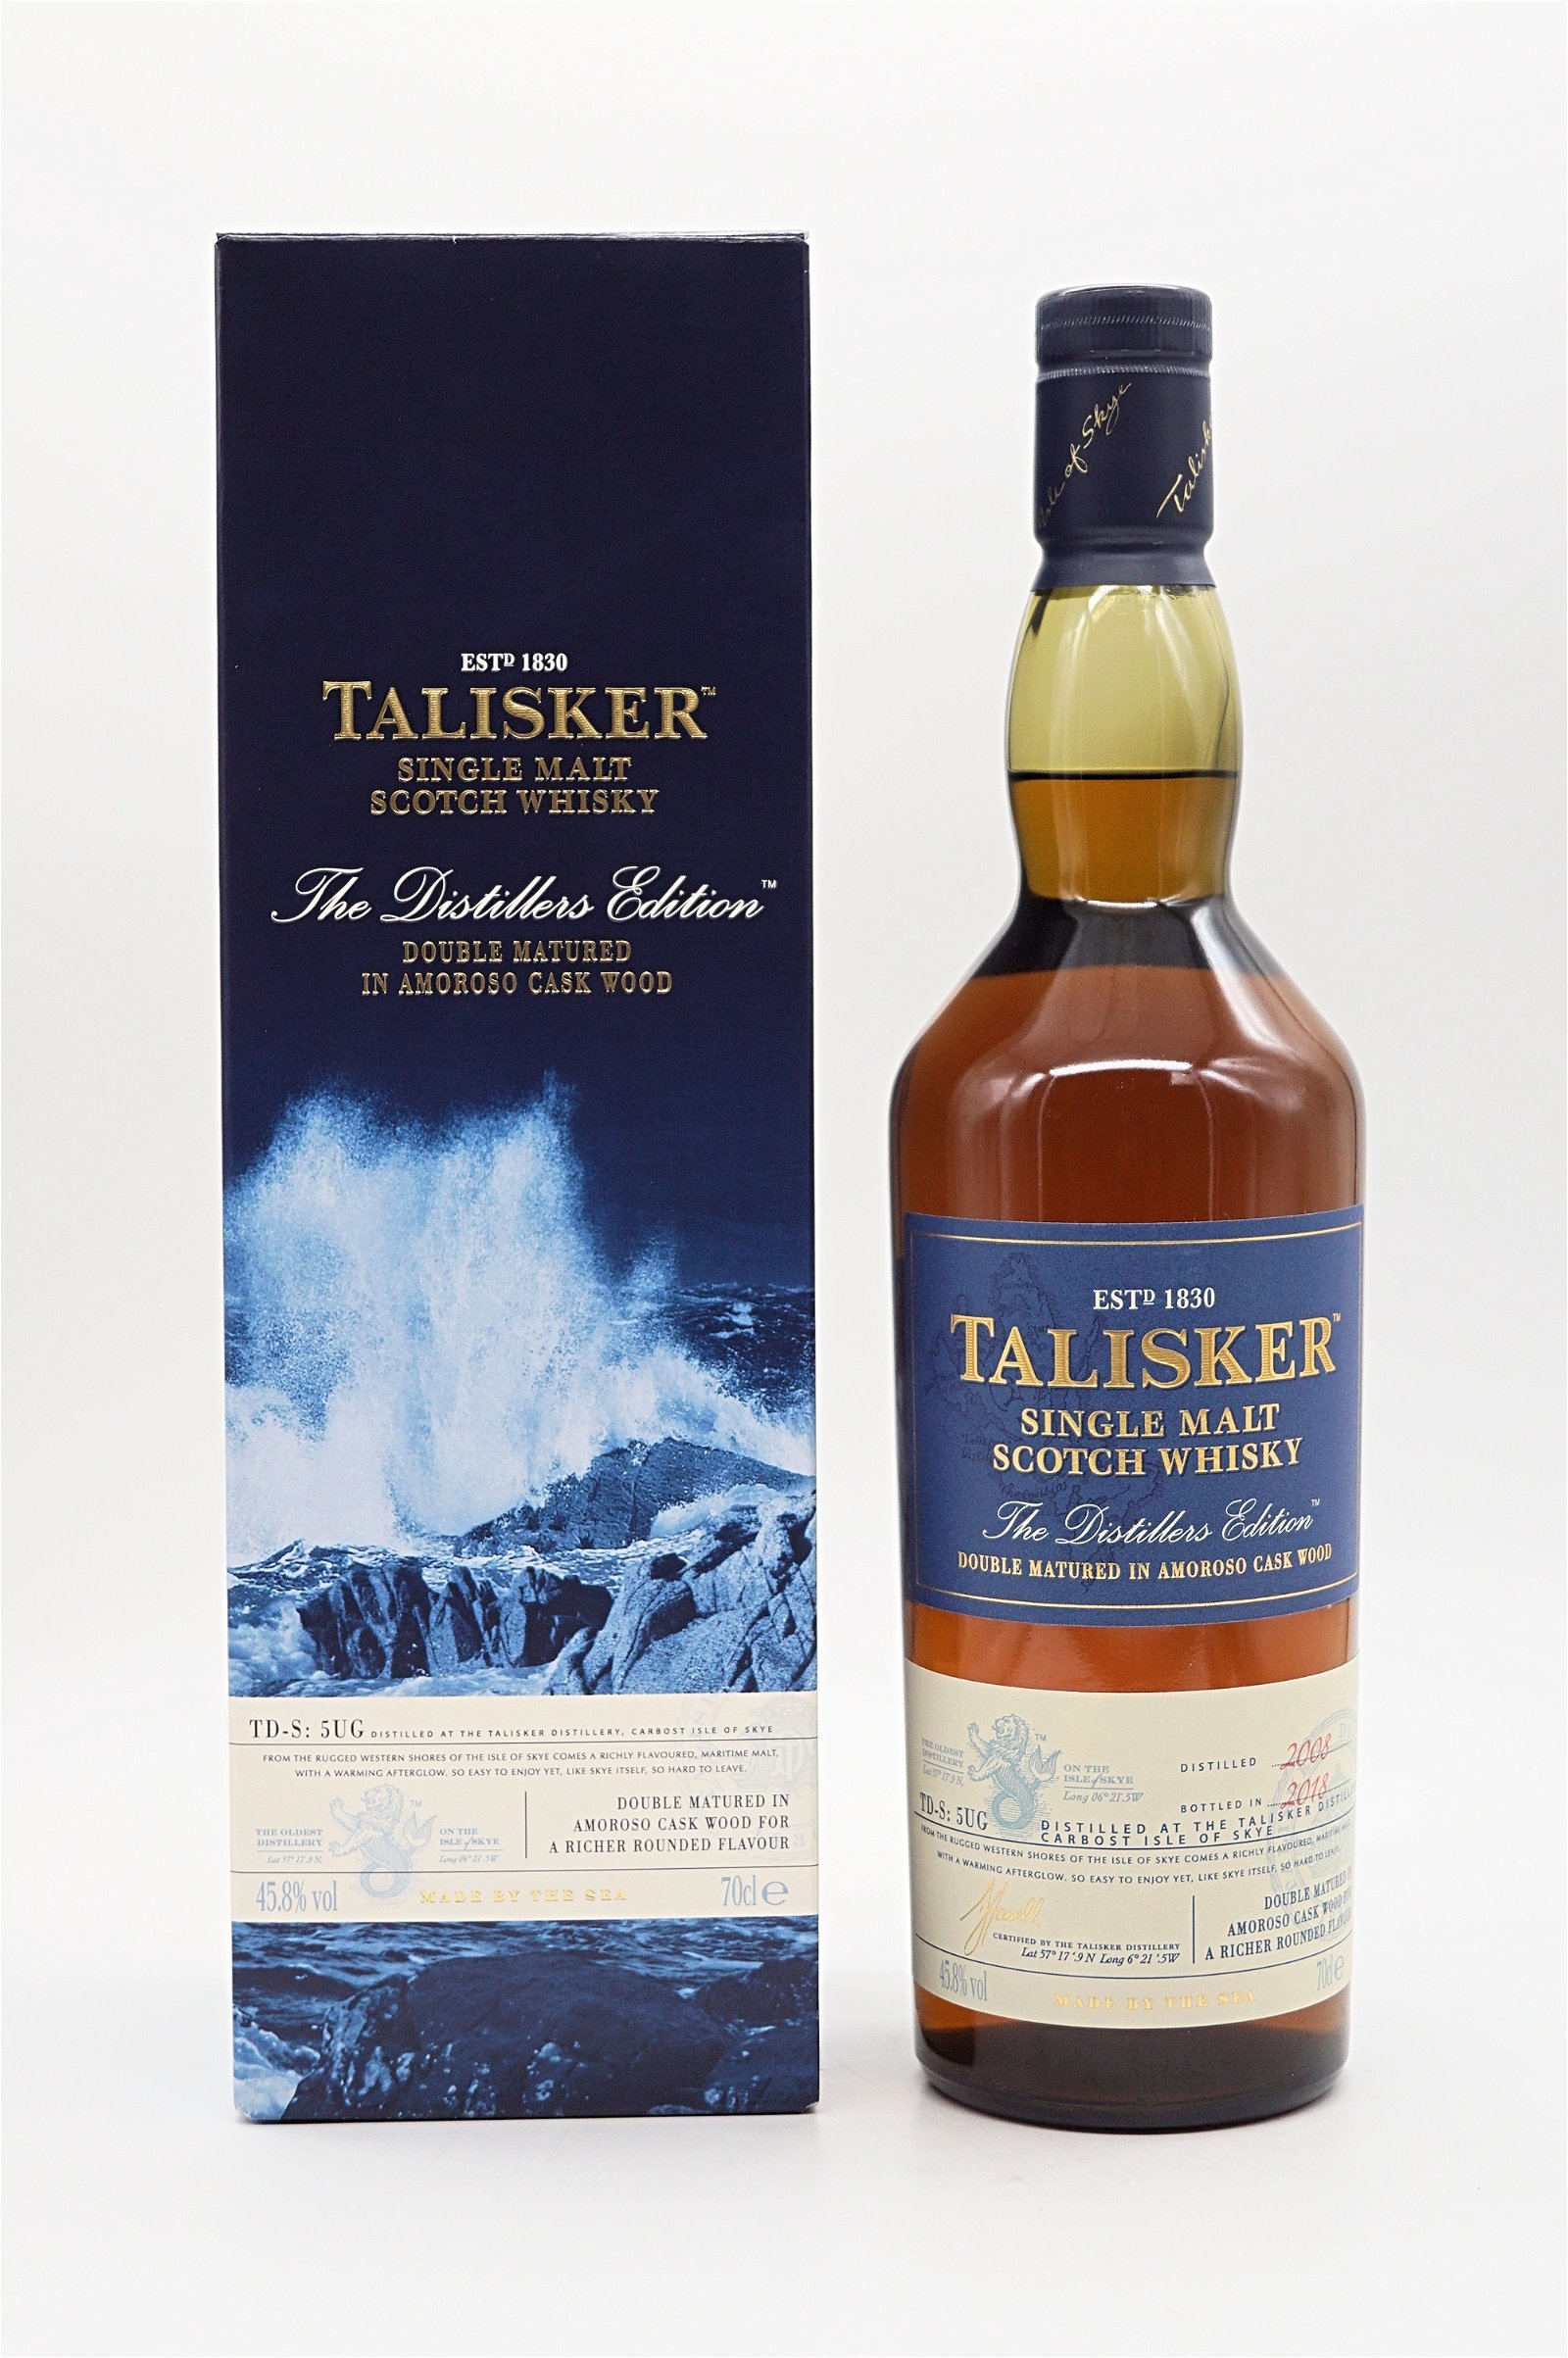 Talisker The Distillers Edition 2008/2018 Double Matured in Amoroso Cask Wood Single Malt Scotch Whisky